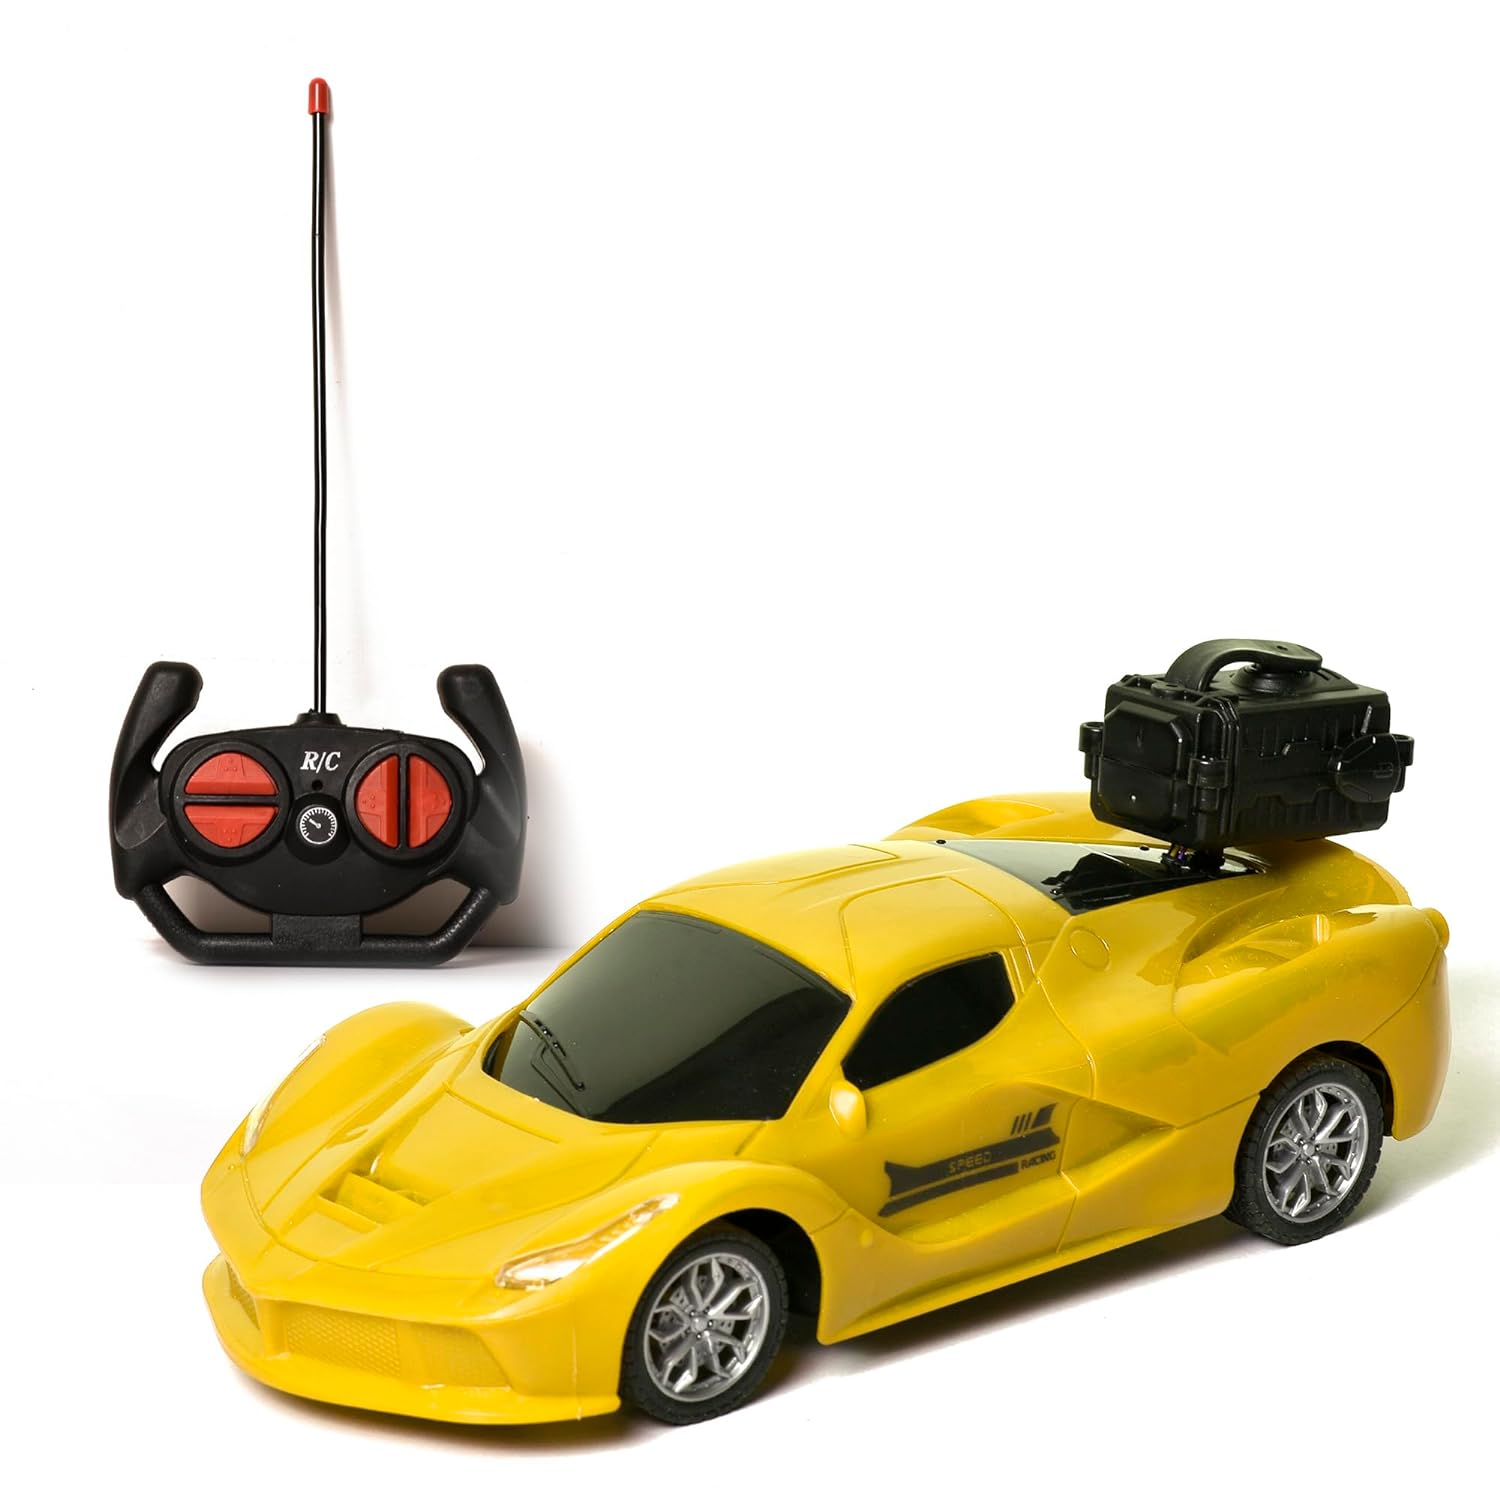 Braintastic Model Diecast Car Toy Vehicle Pull Back Friction Car with Openable Doors Light & Music Toys for Kids Age 3+ Years (Spray Car Yellow)